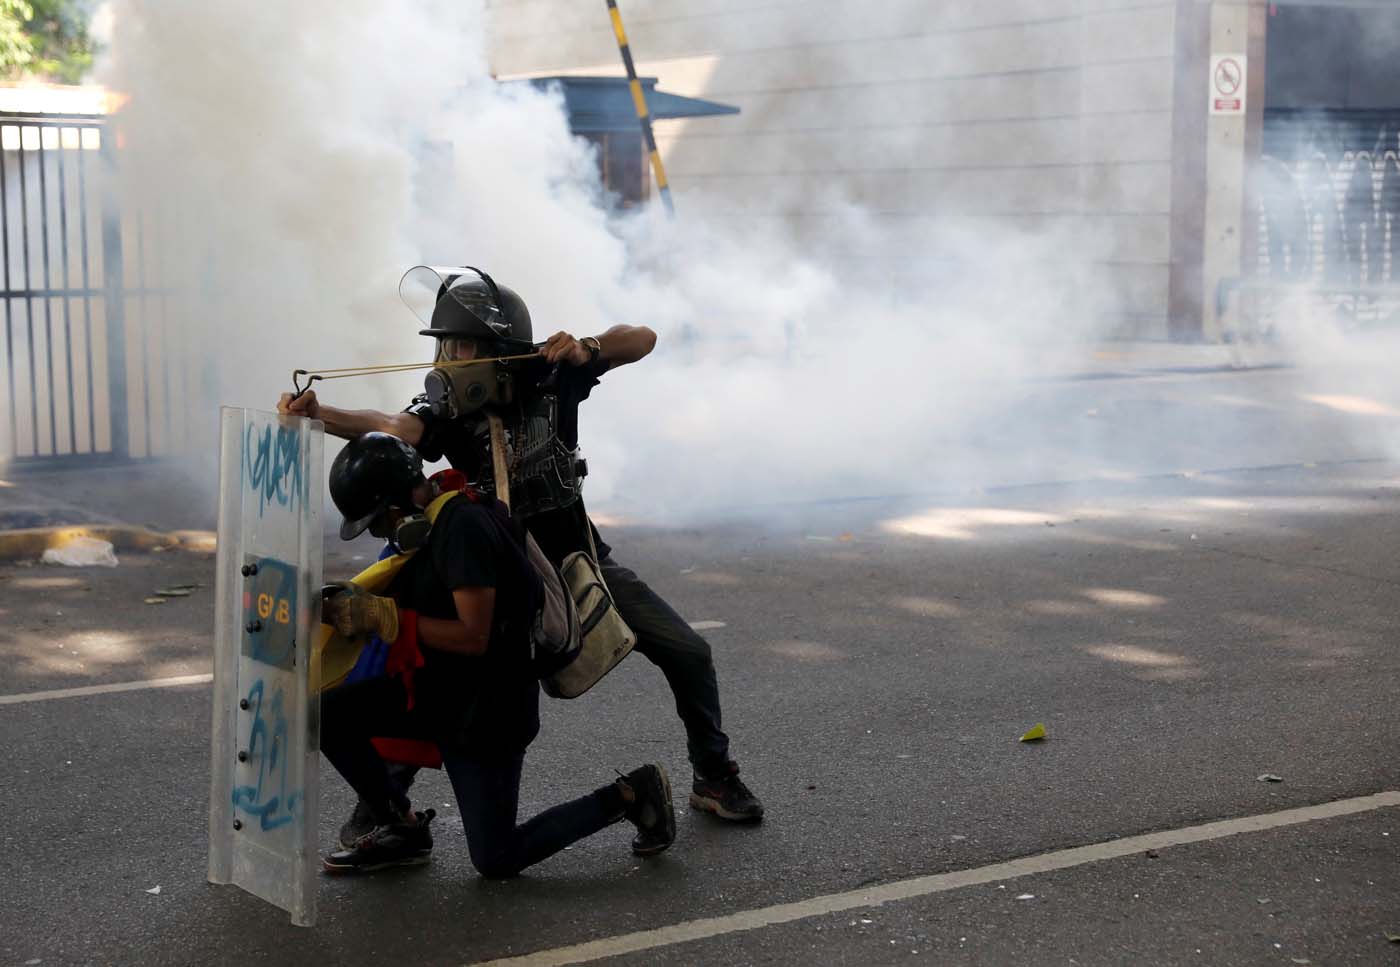 Opposition supporters clash with riot security forces while rallying against President Nicolas Maduro in Caracas, Venezuela, May 20, 2017. REUTERS/Carlos Garcia Rawlins TPX IMAGES OF THE DAY